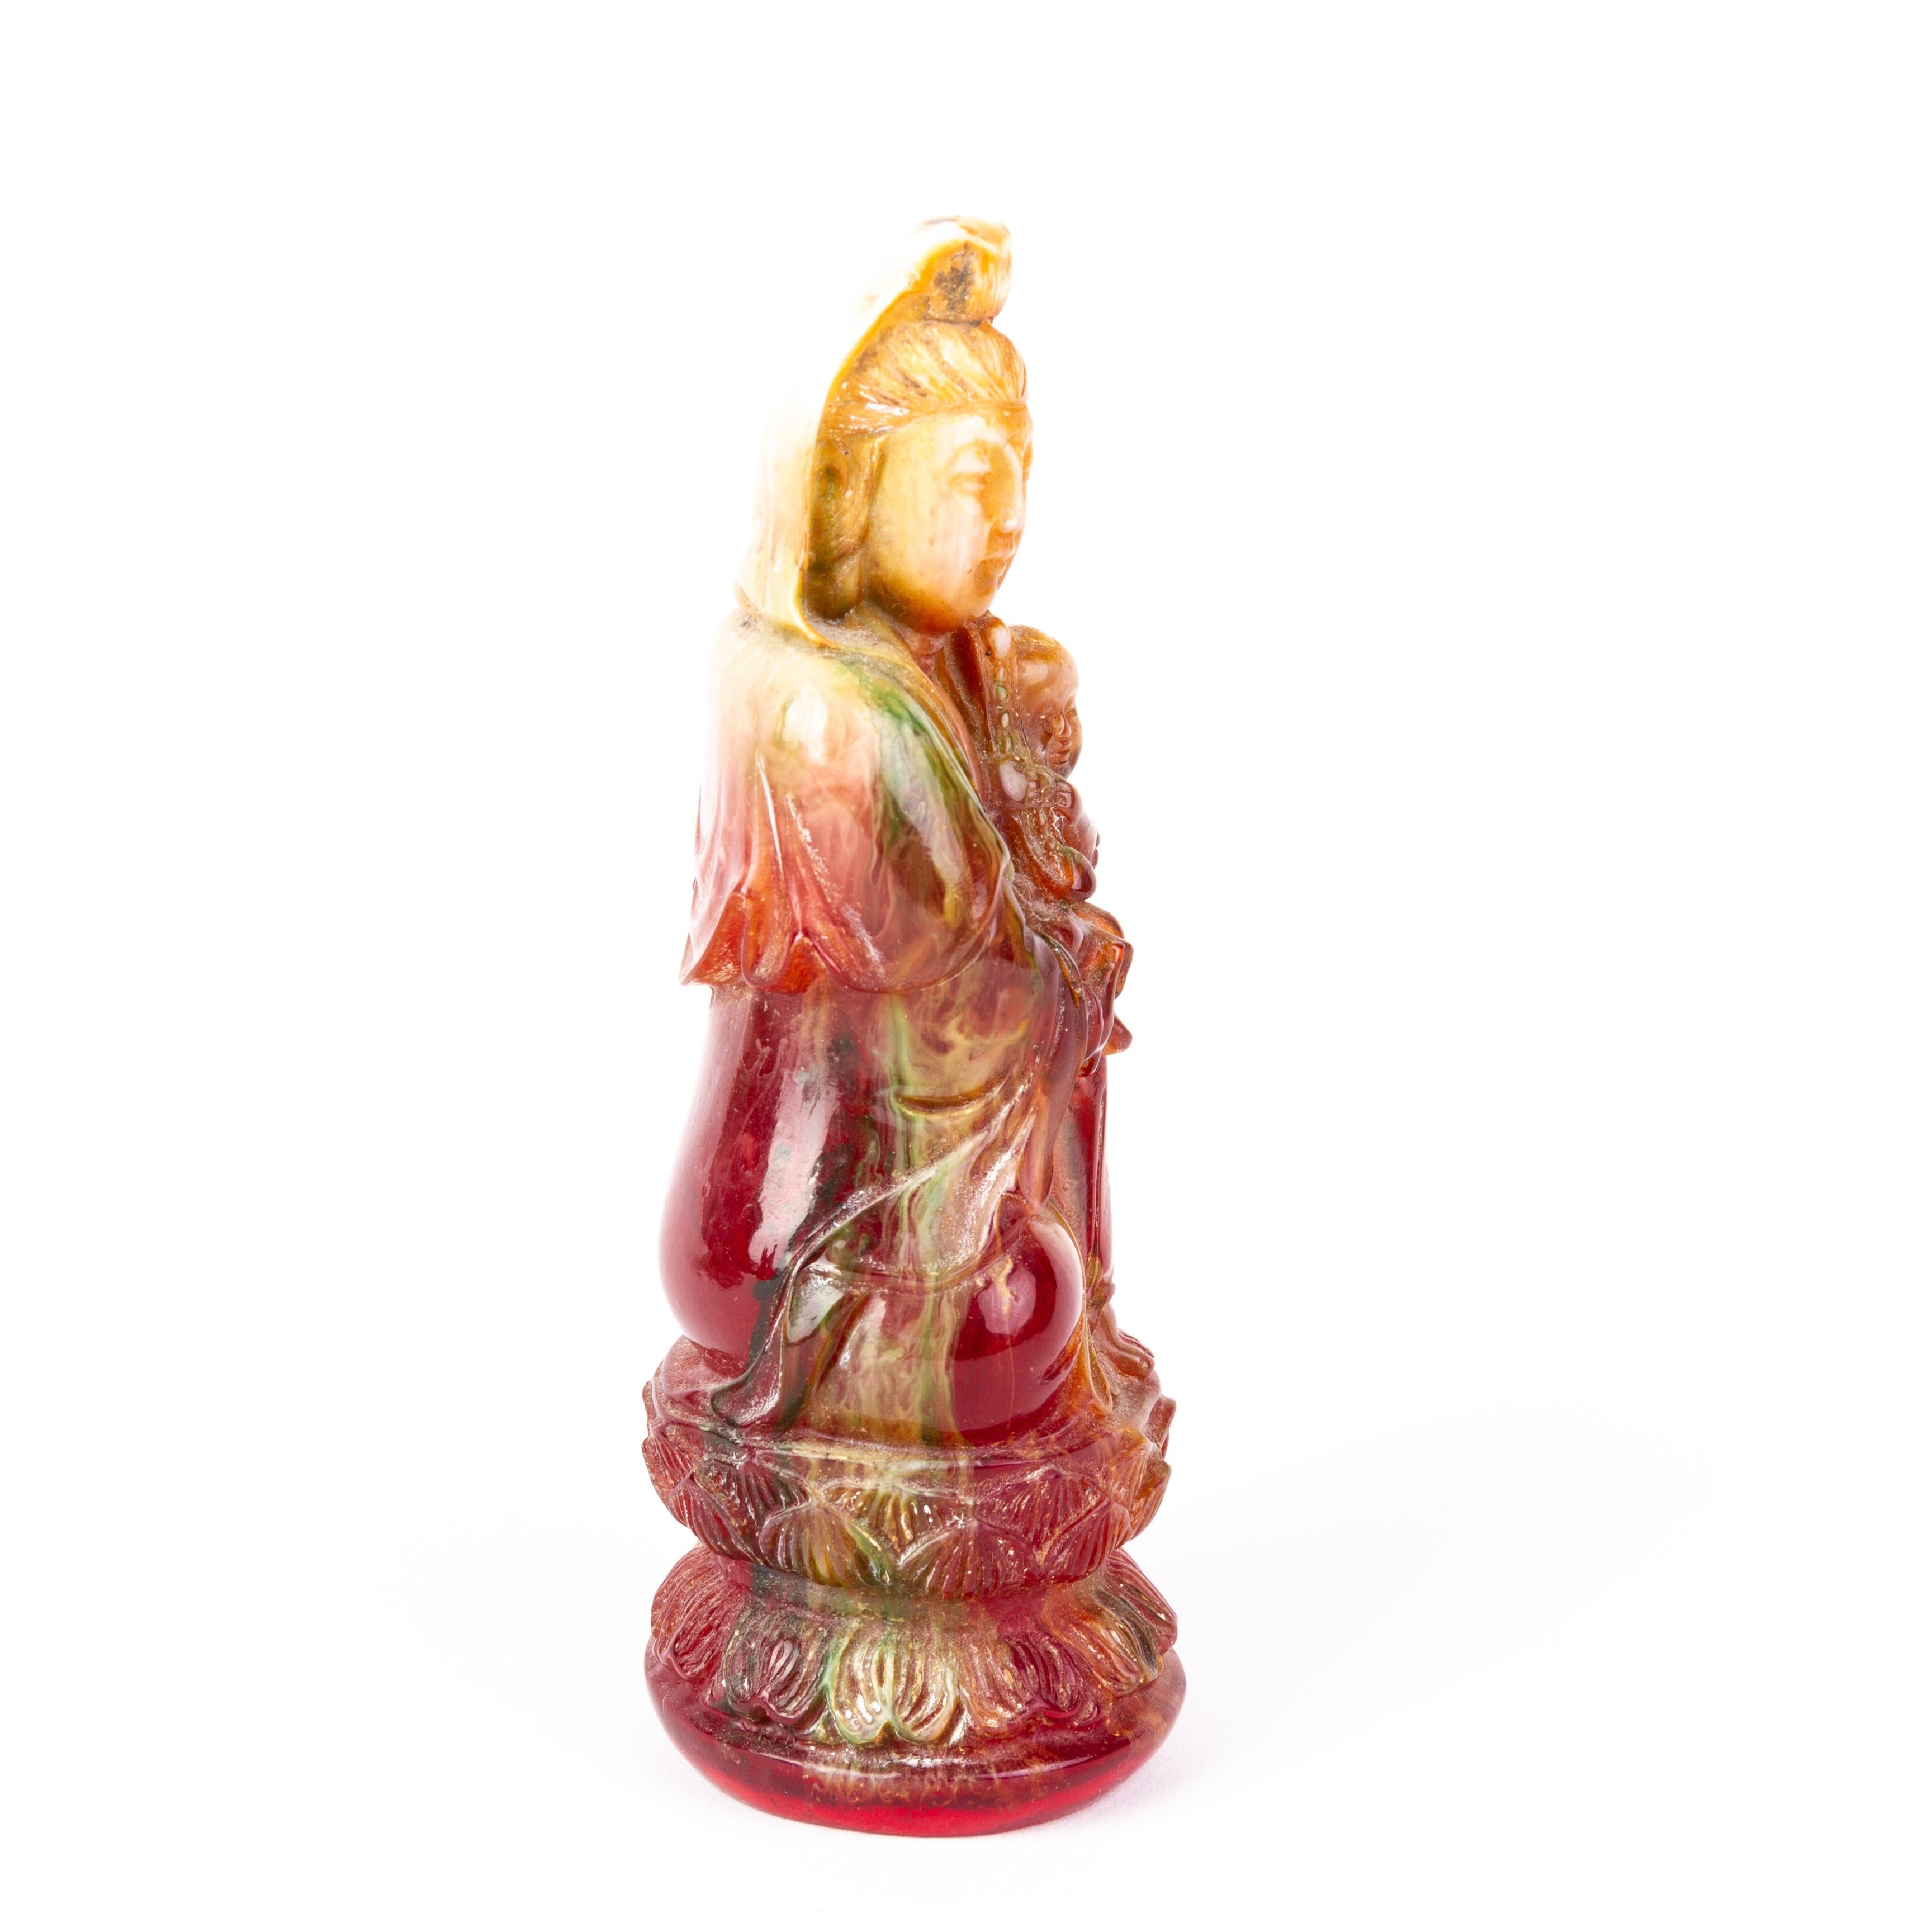 A finely carved Chinese soapstone carving sculpture of a Quanyin.
Chinese Carved Soapstone Sculpture 19th Century Qing
1820 to 1880 China, Qing Dynasty.
Very good condition.
From a private collection.
Free international shipping.